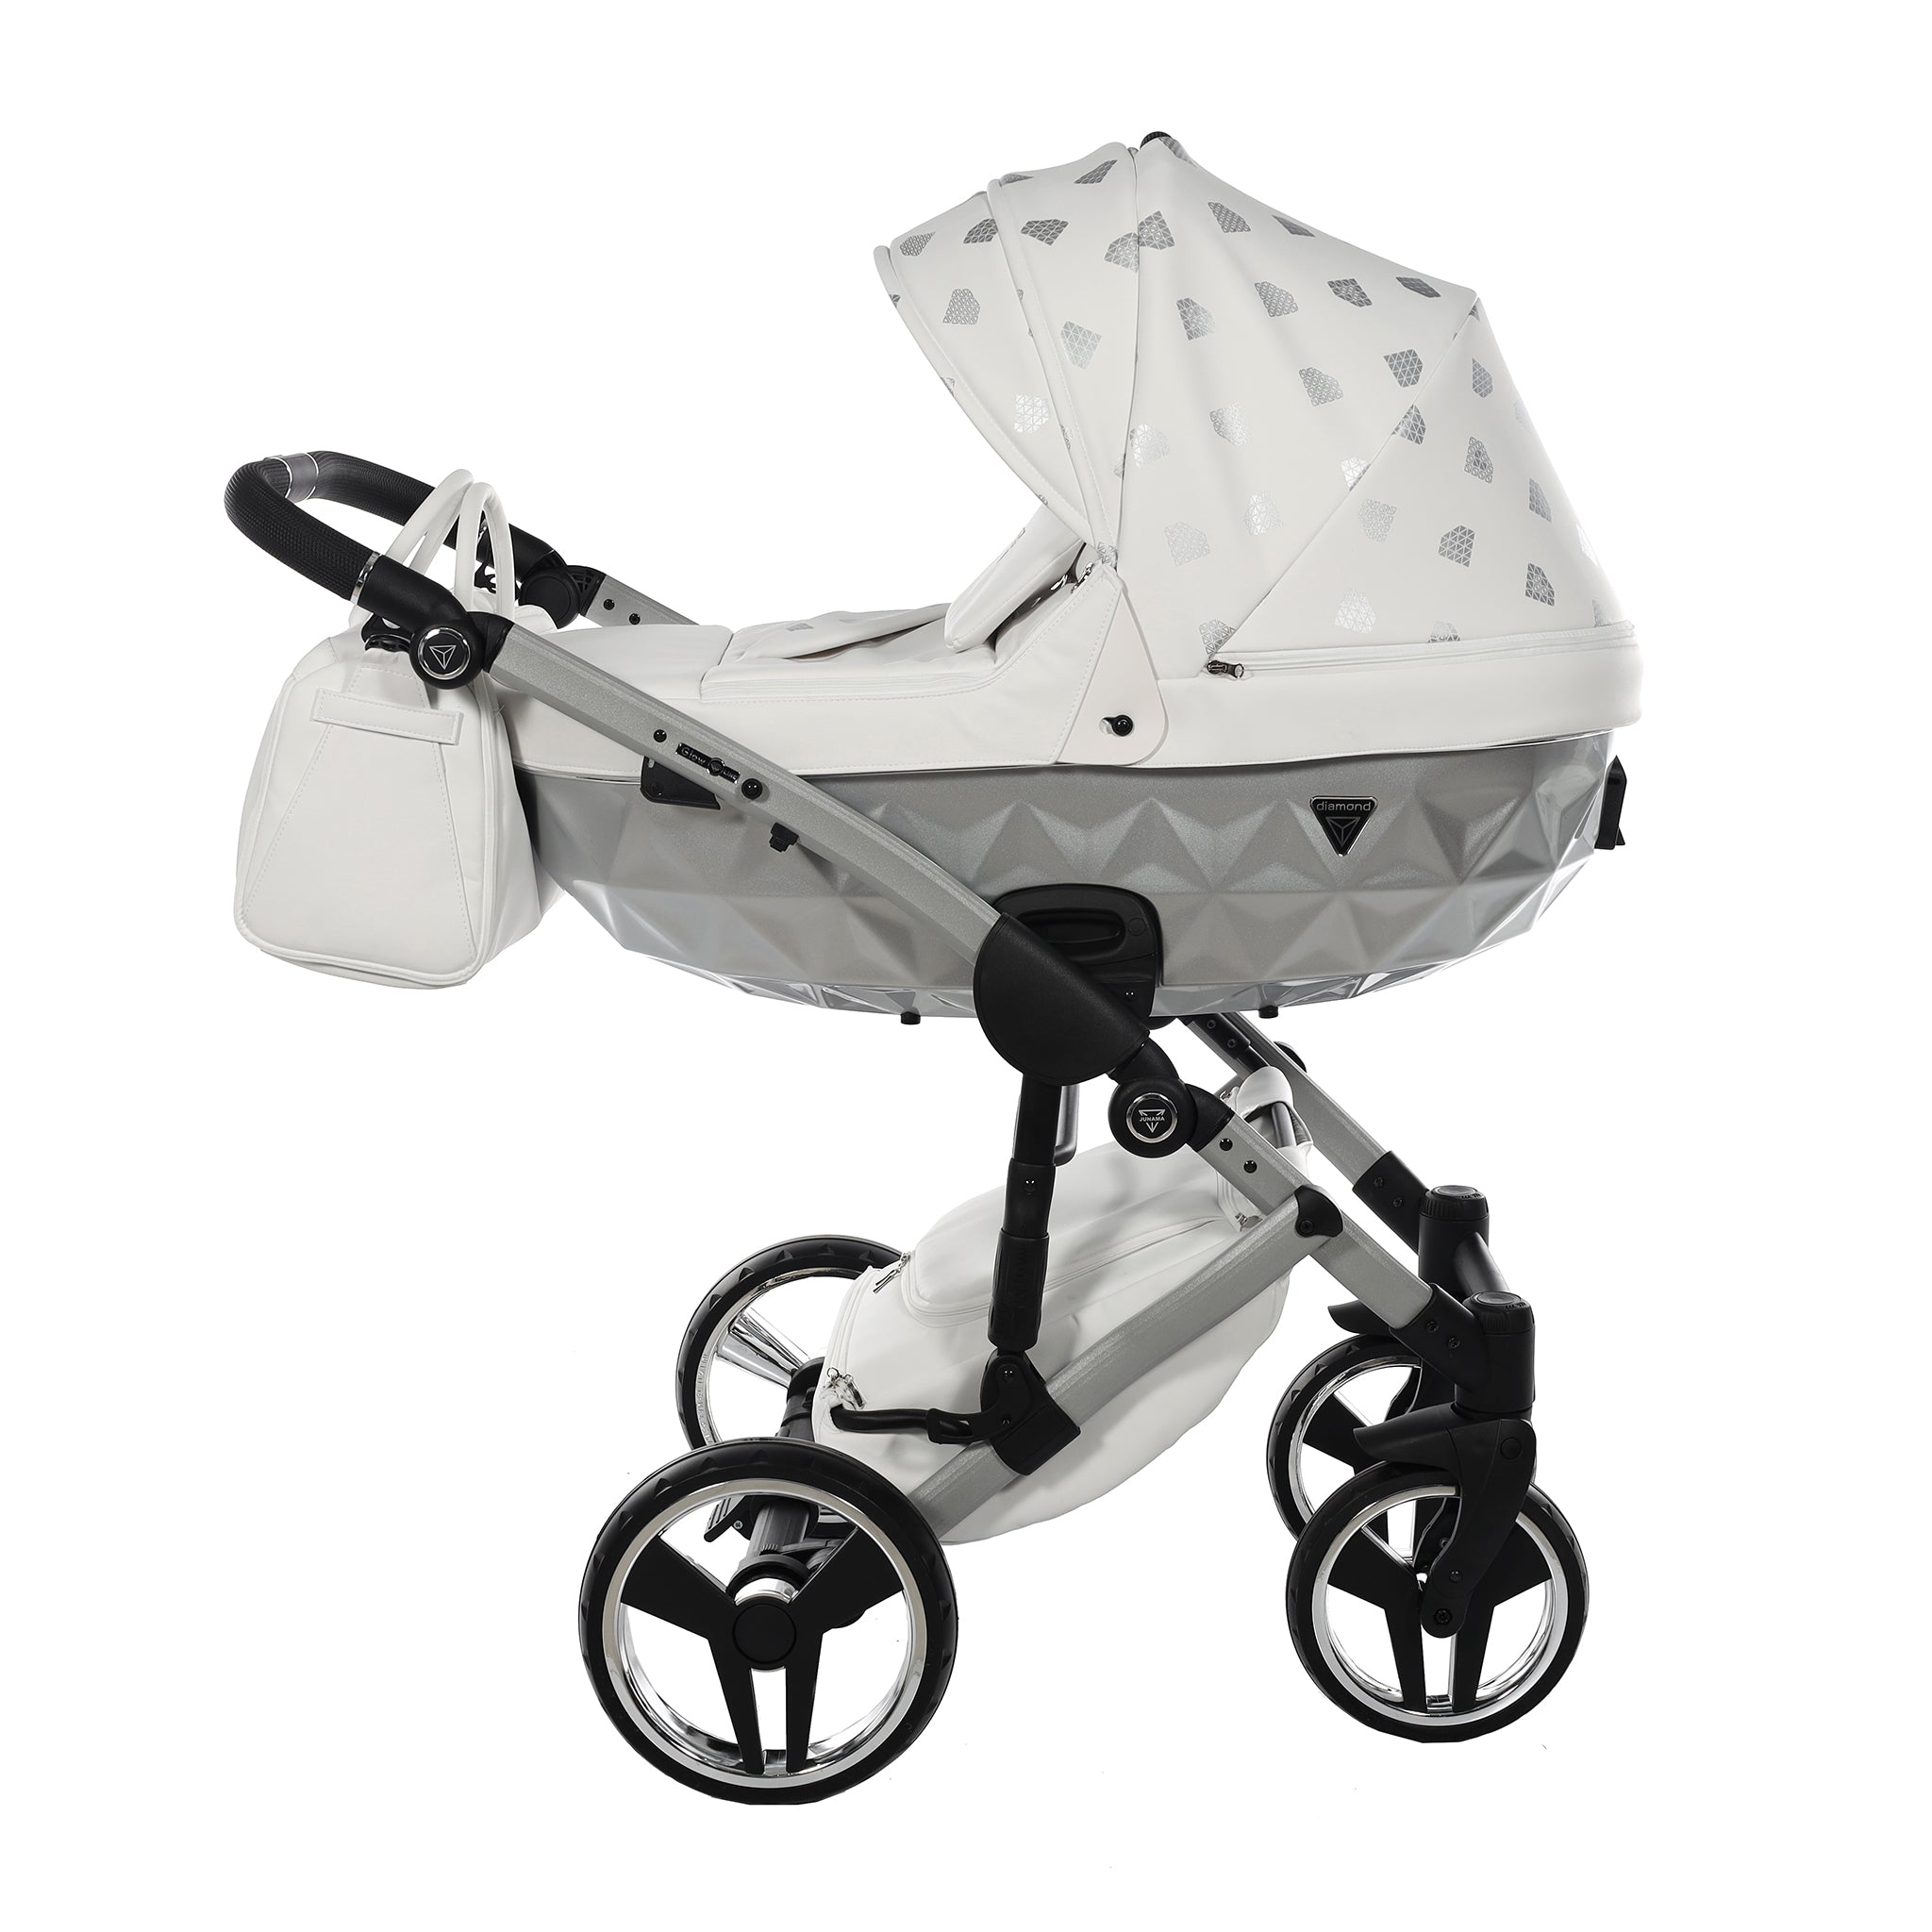 Junama GLOW, baby prams or stroller 2 in 1 - Silver and White, Code number: JUNGLW03